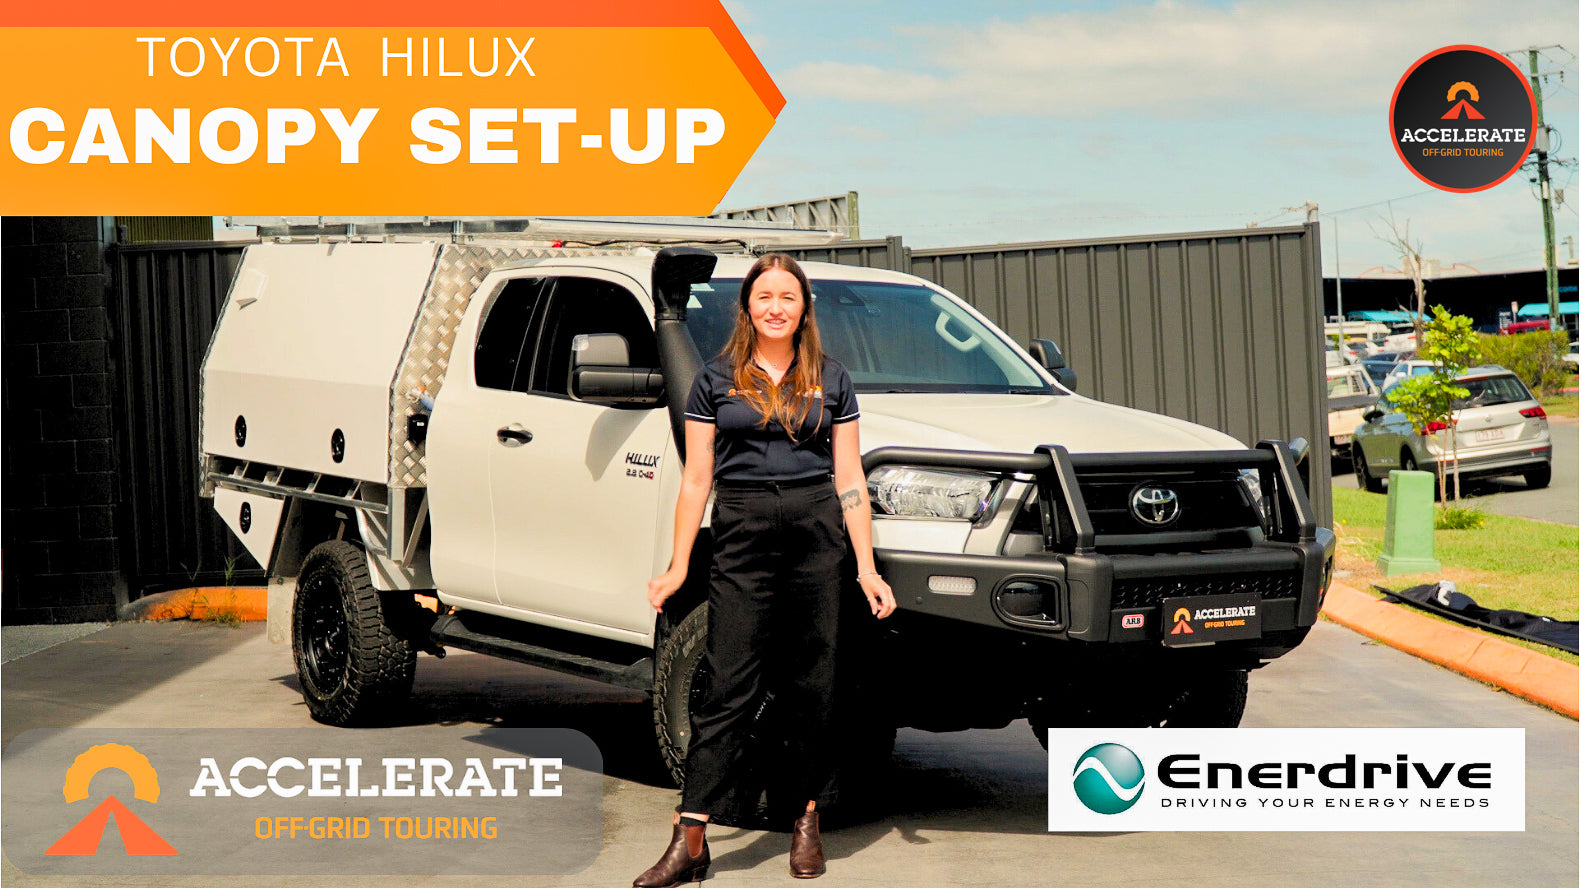 Toyota Hilux Canopy Setup for Off-Grid living with Enerdrive